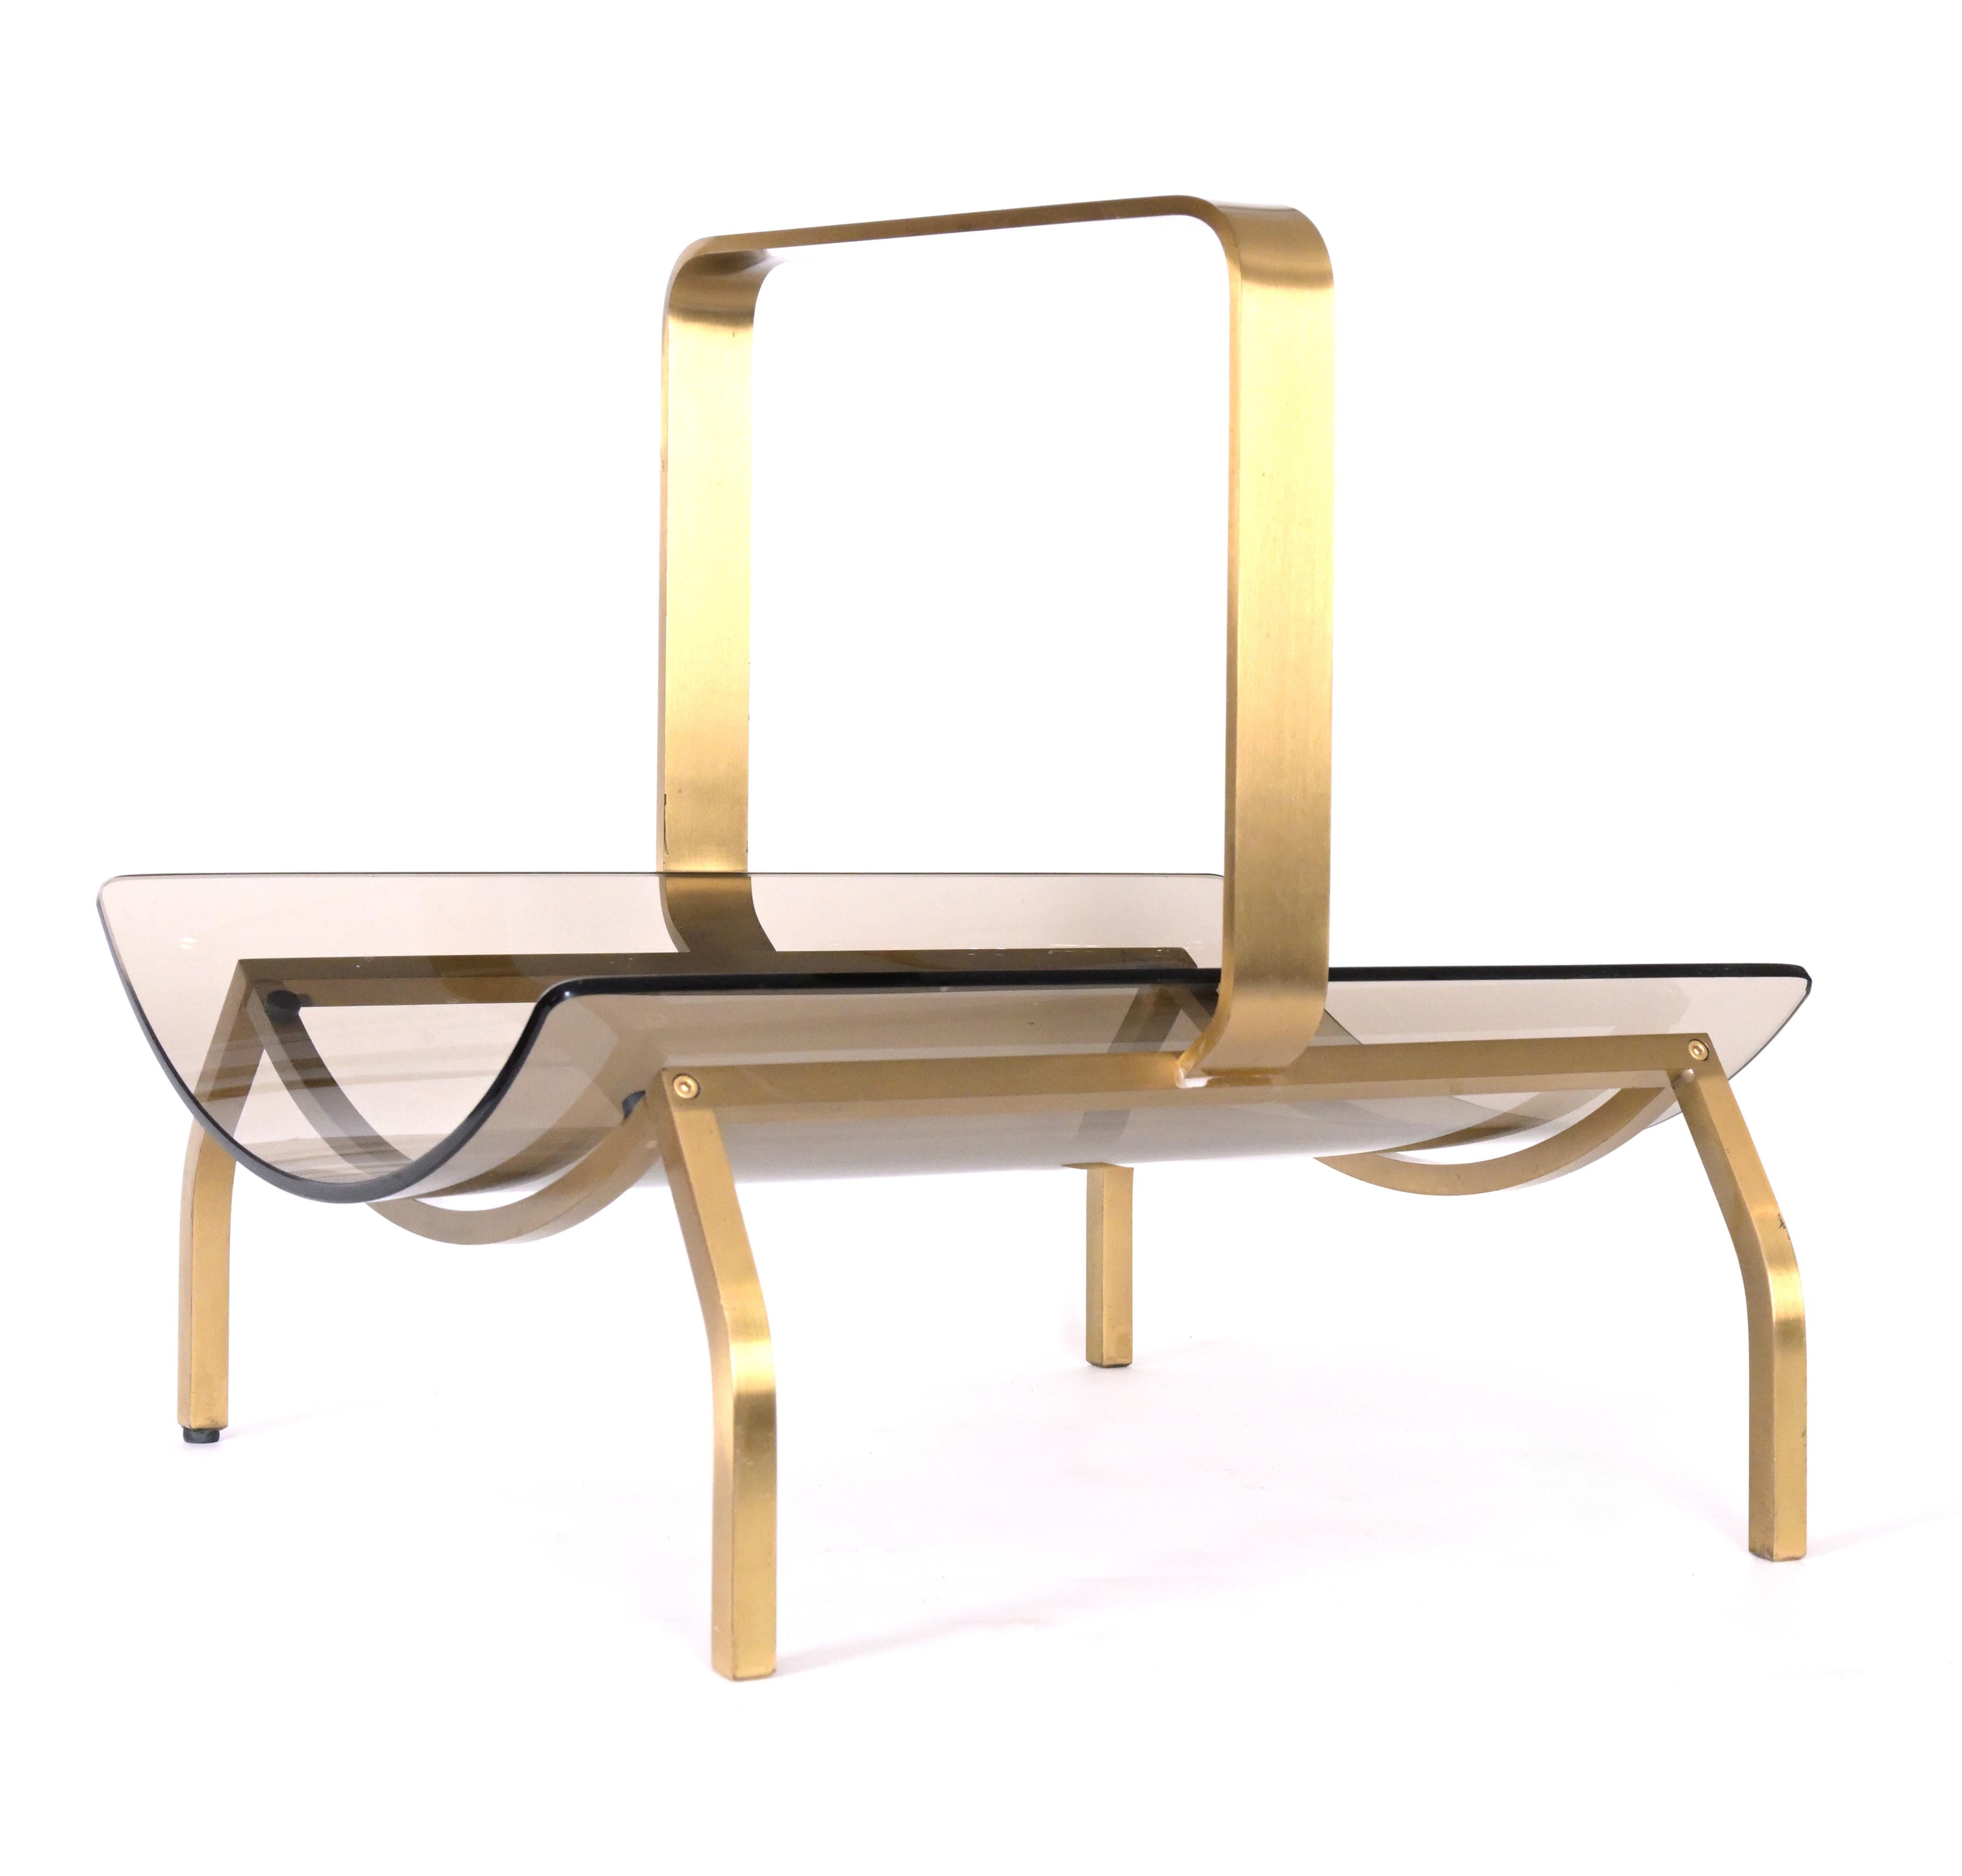 A smoked glass magazine rack with a curved brass frame featuring tapered legs and handle. From the 1960s-1970s made by the Italian design company Fontana Arte (1881-).